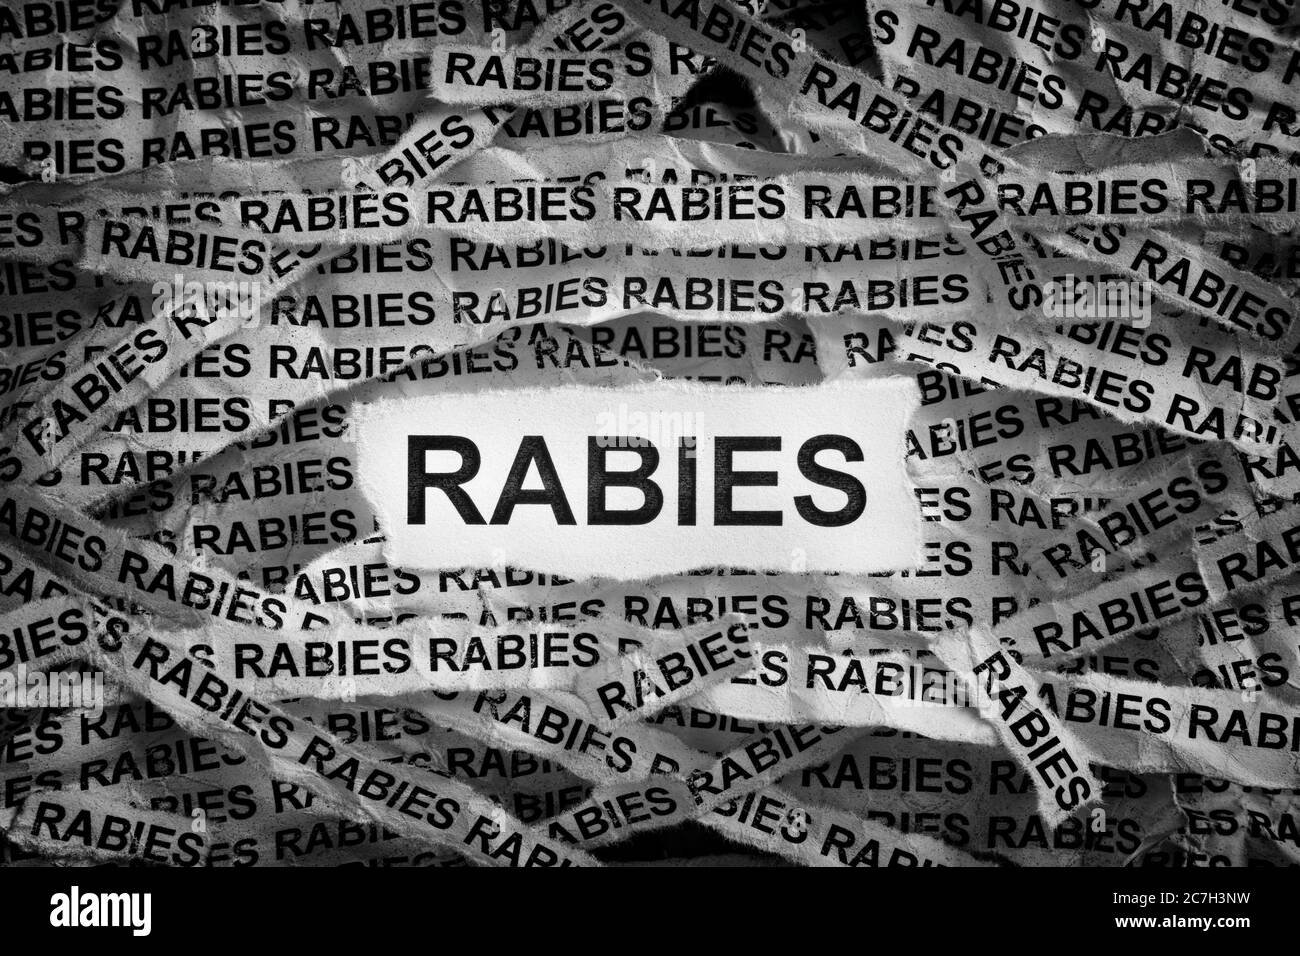 Rabies. Torn pieces of paper with the word Rabies. Concept Image. Black and white. Close up. Stock Photo